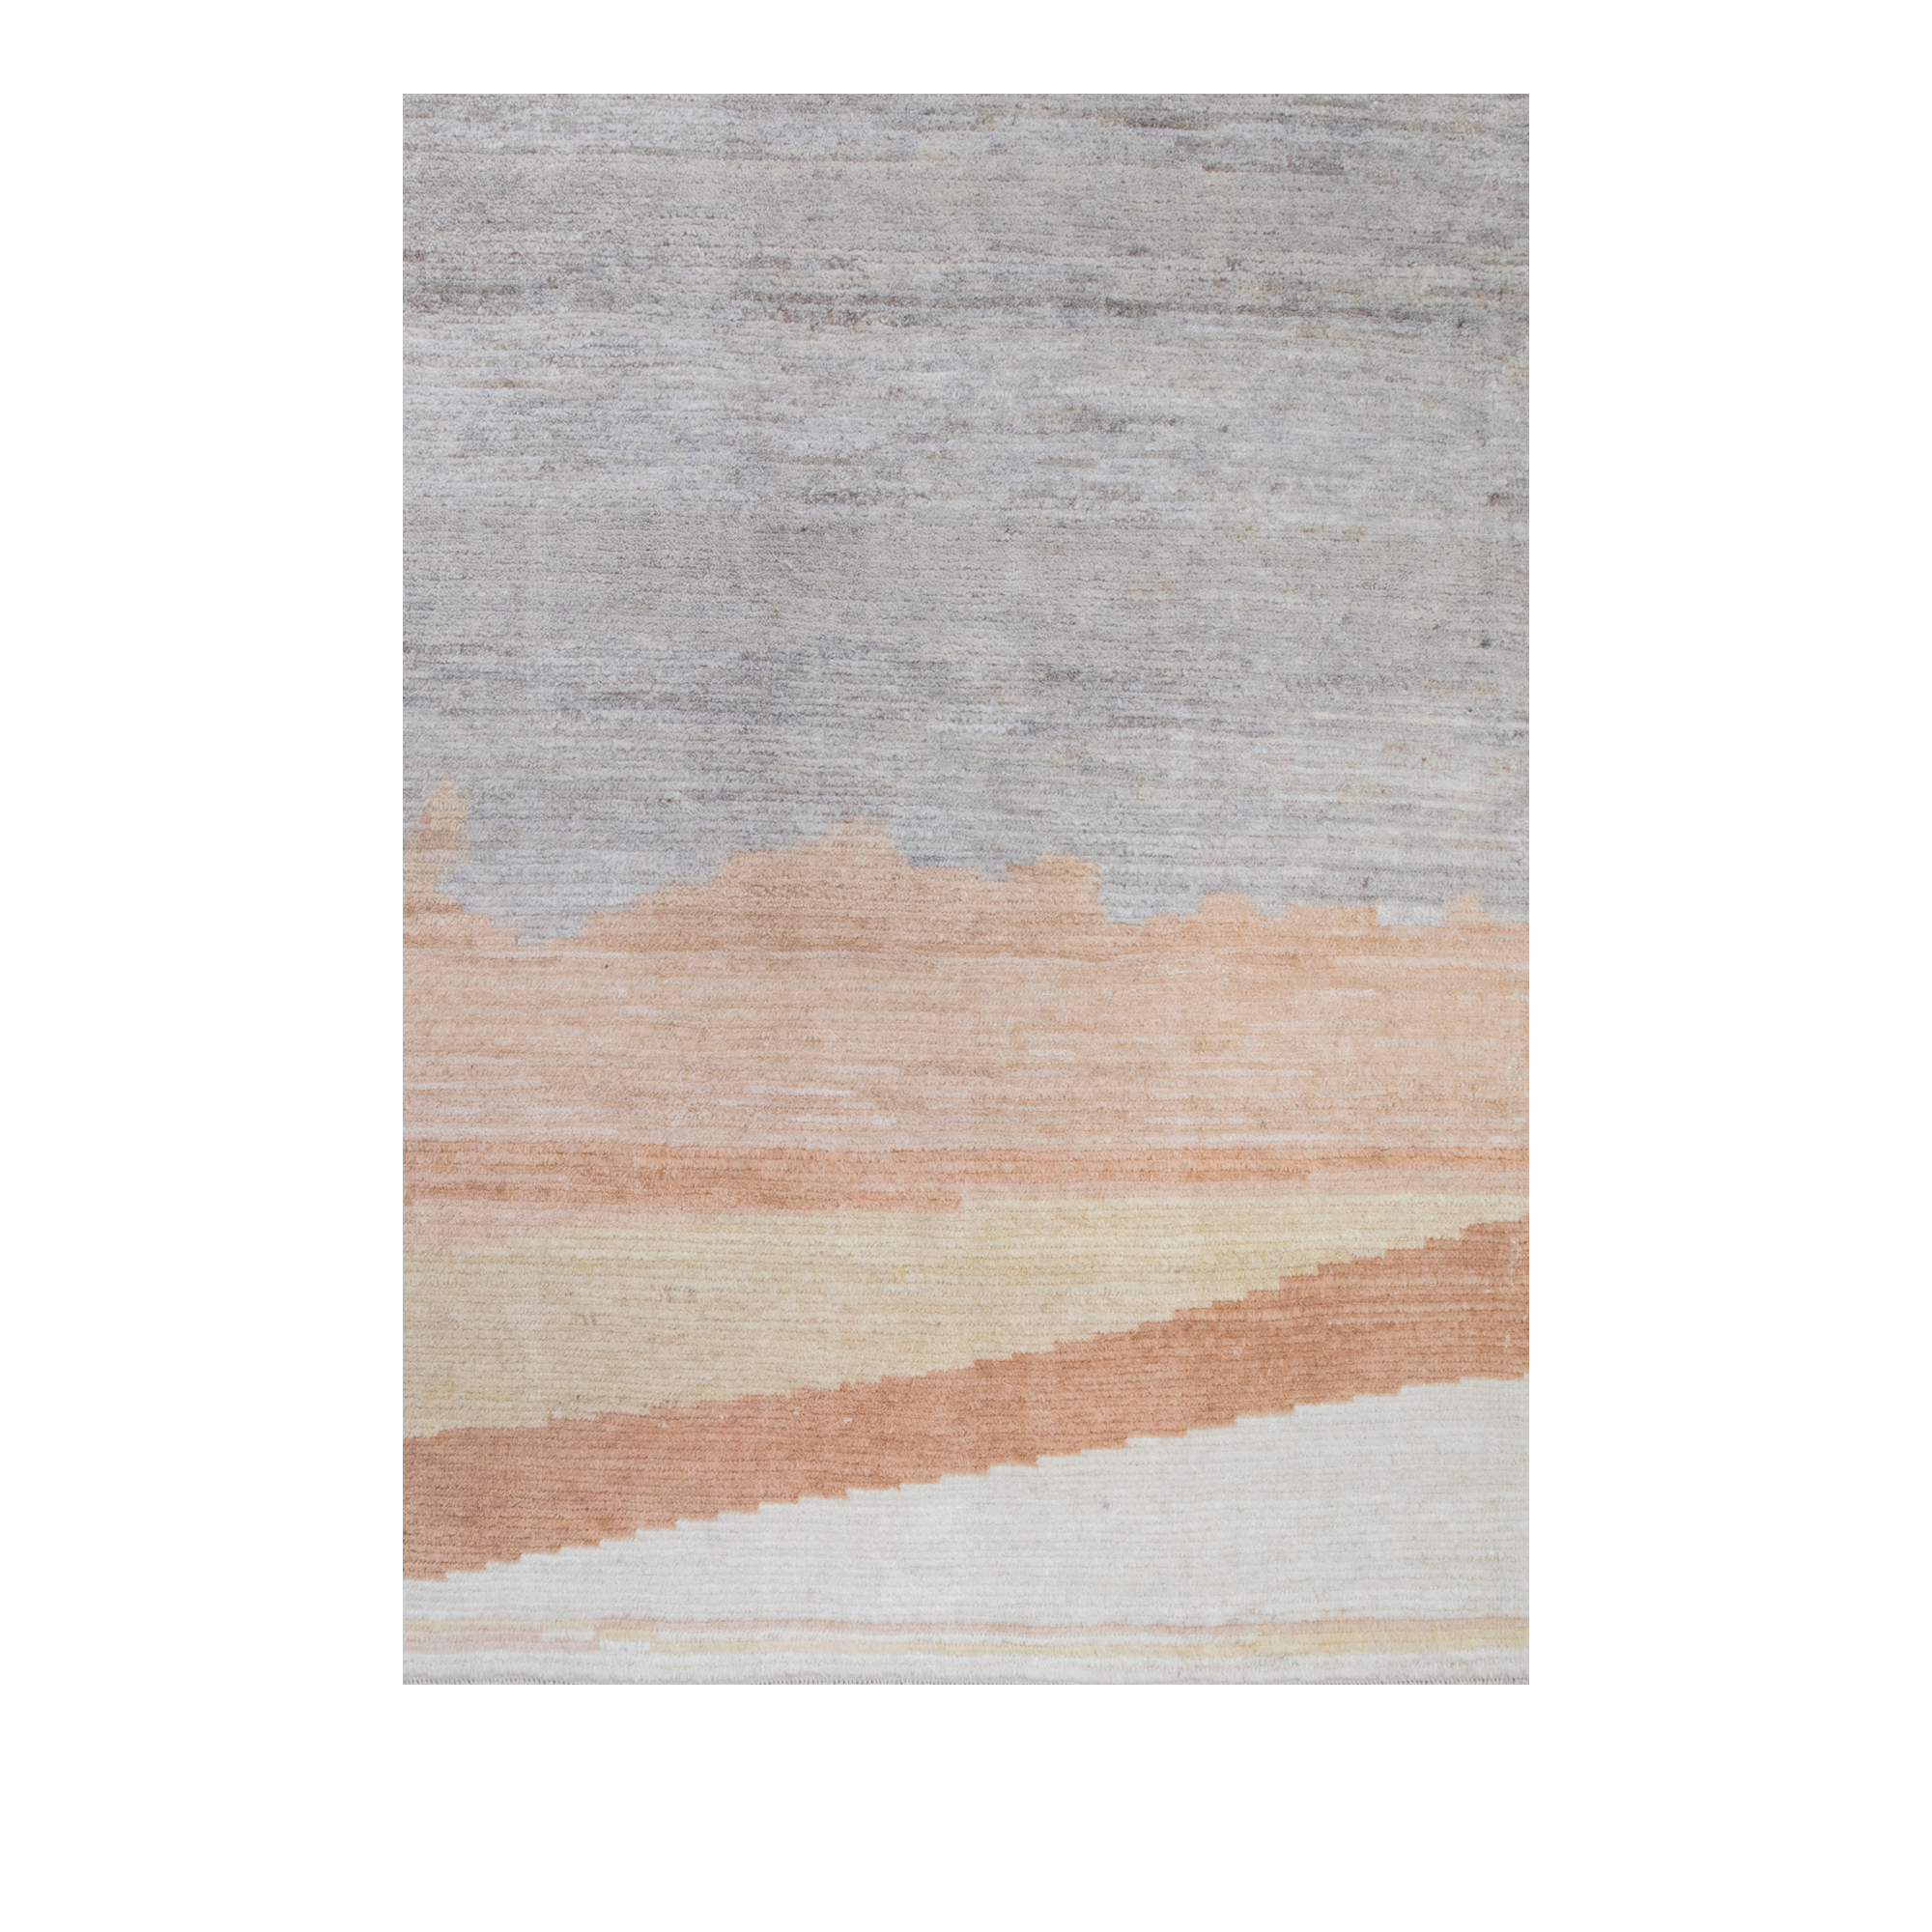 Topanga rug is a modern and minimalist piece blending neutral greys, a pop of coral, and dusty rose shades.